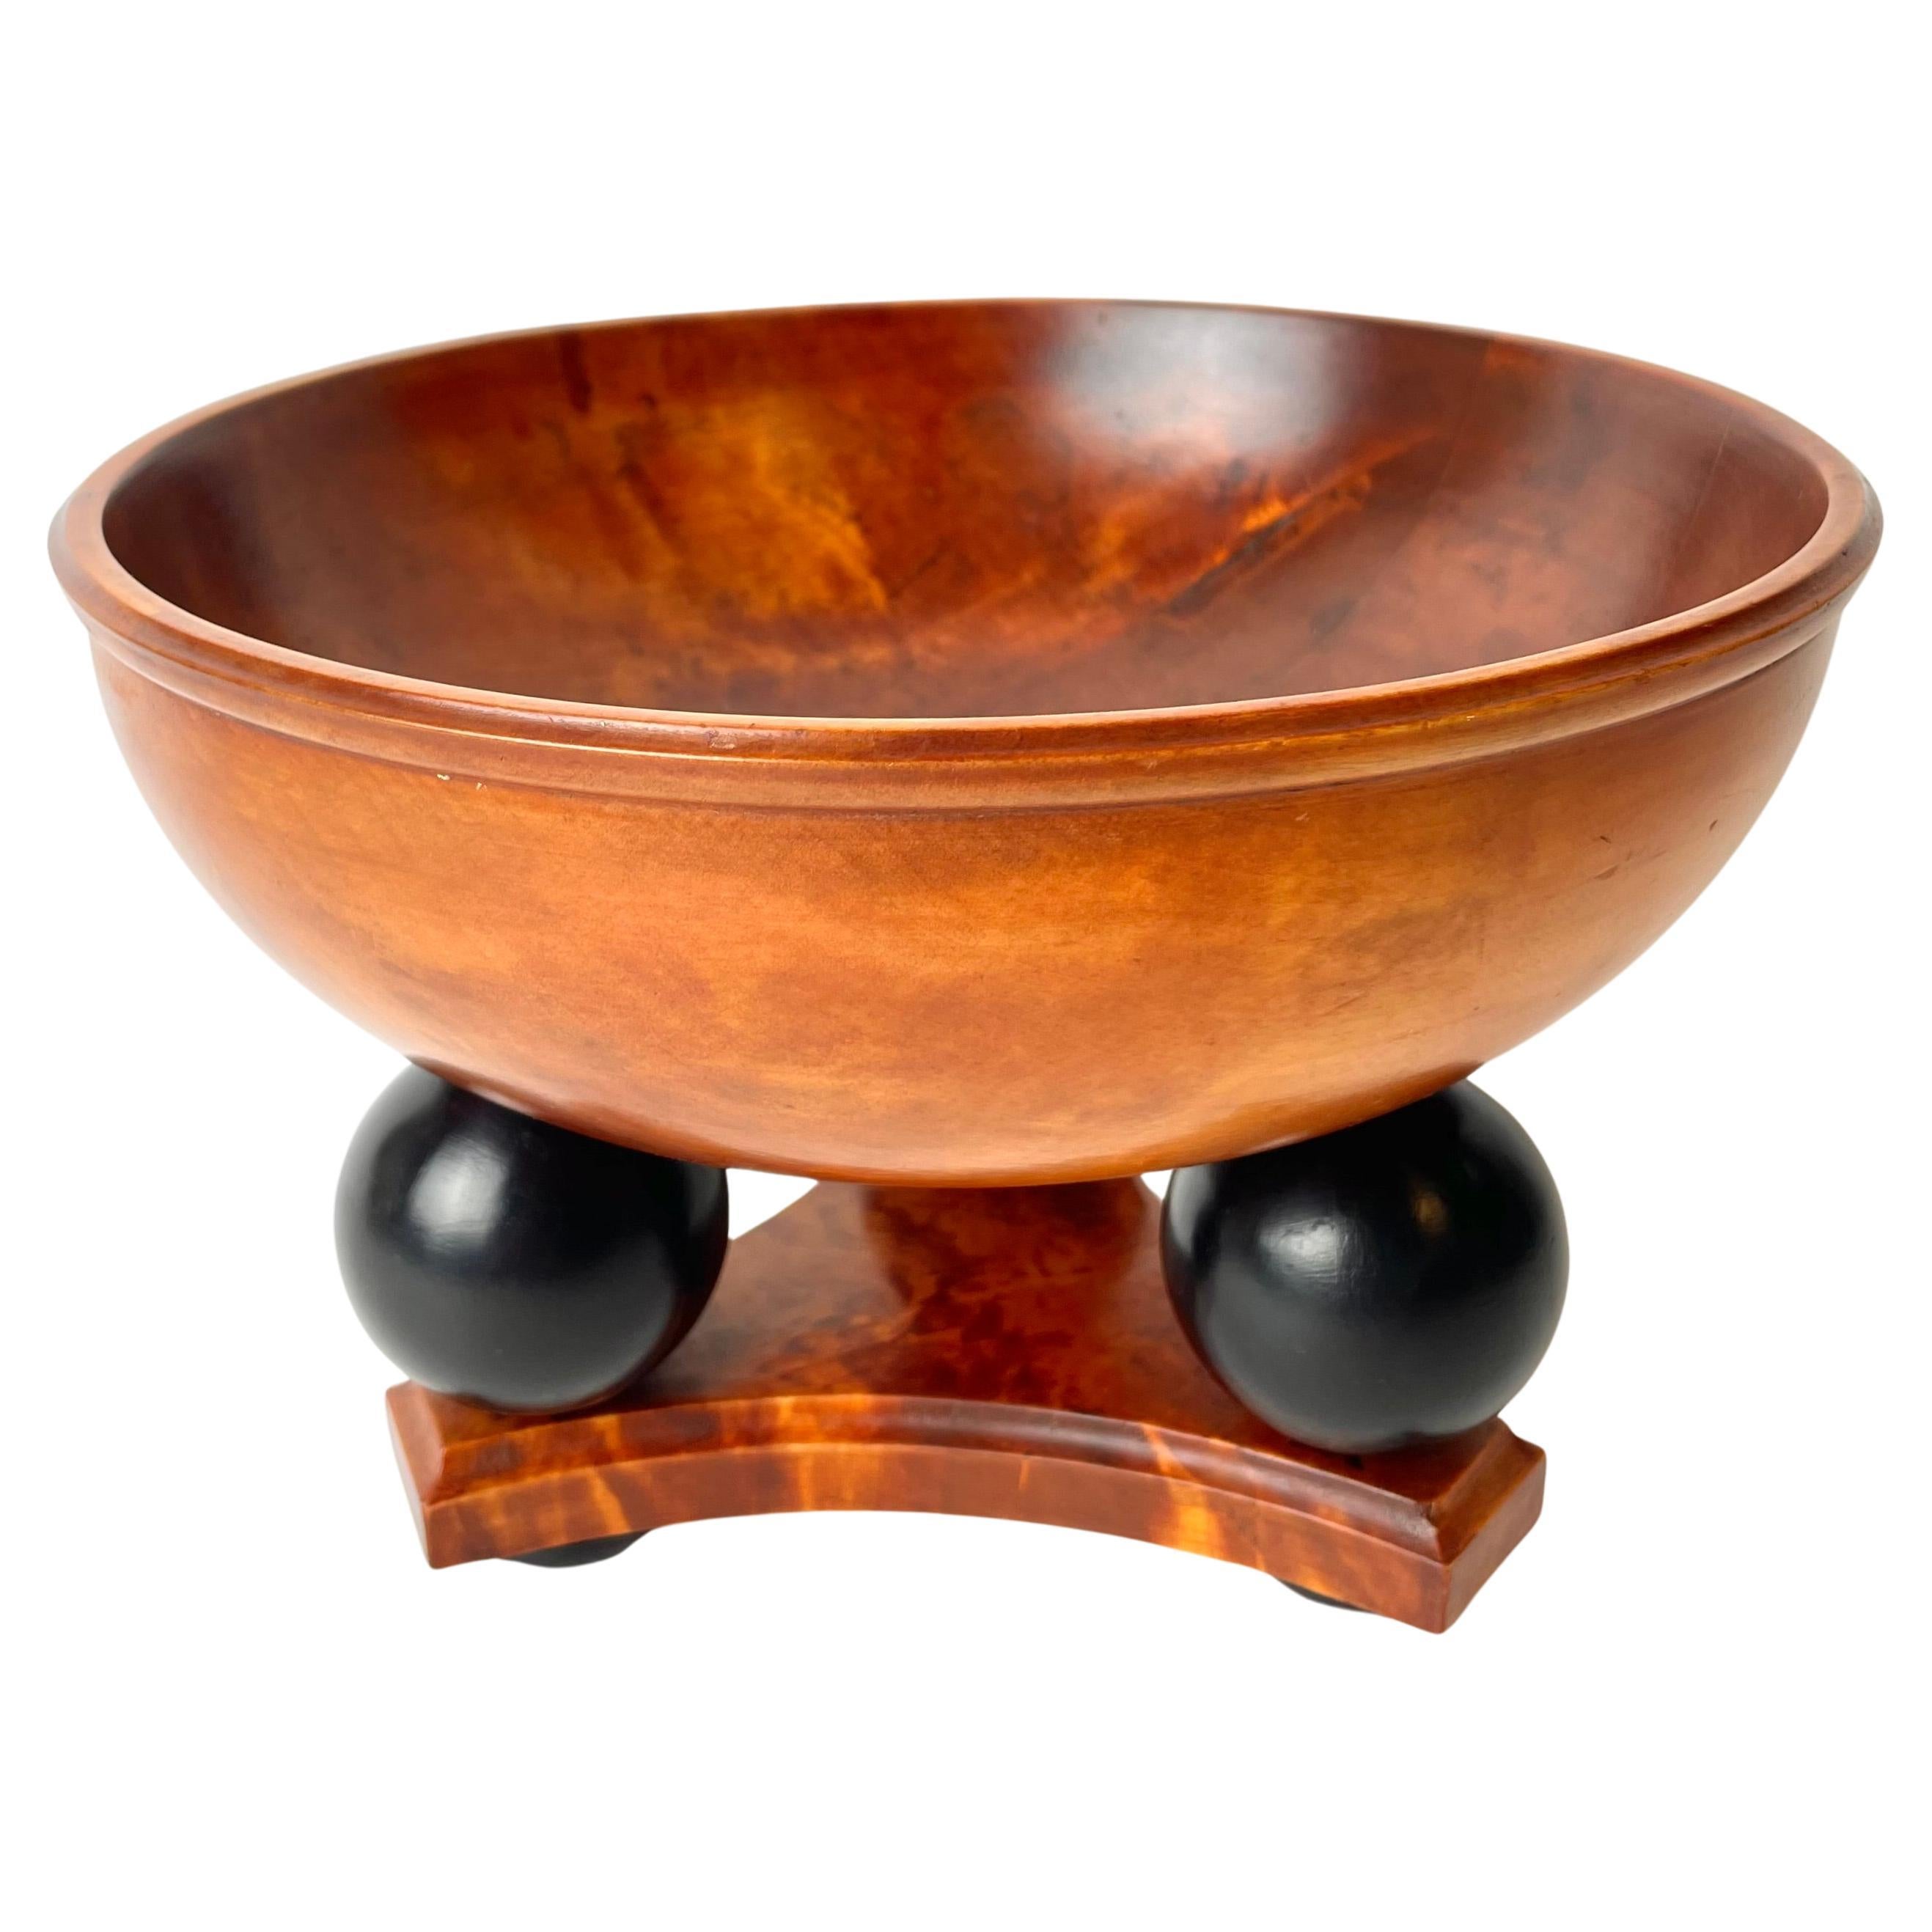 Sophisticated Swedish Bowl in Flame Birch, with Black Details. Art Deco 1920-30s